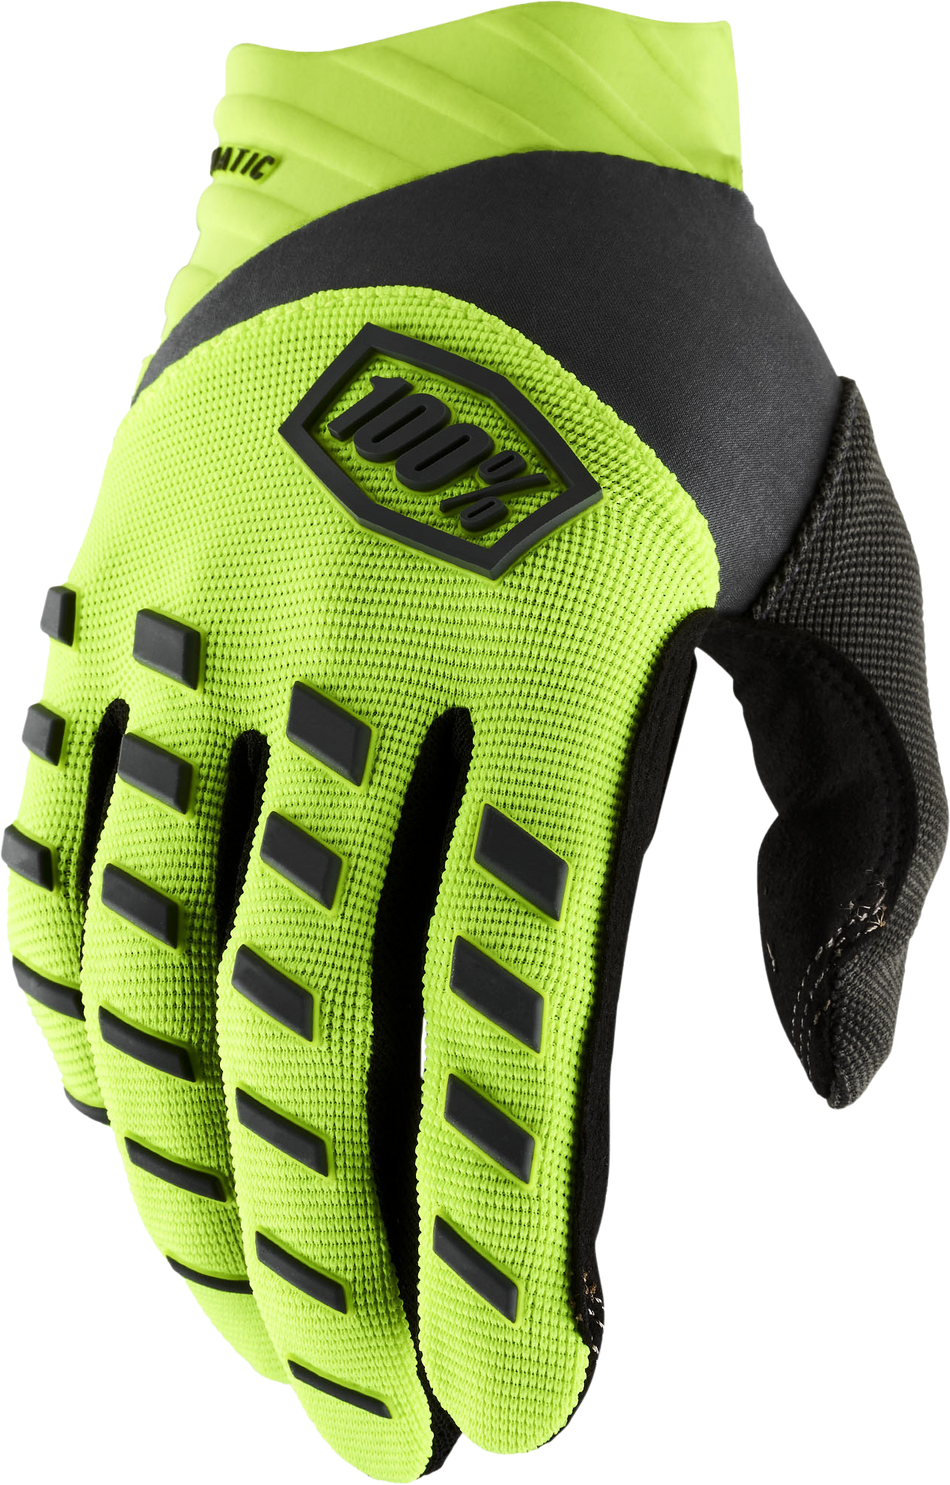 100% Airmatic Youth Gloves Fluo Yellow/Black Sm 10001-00004